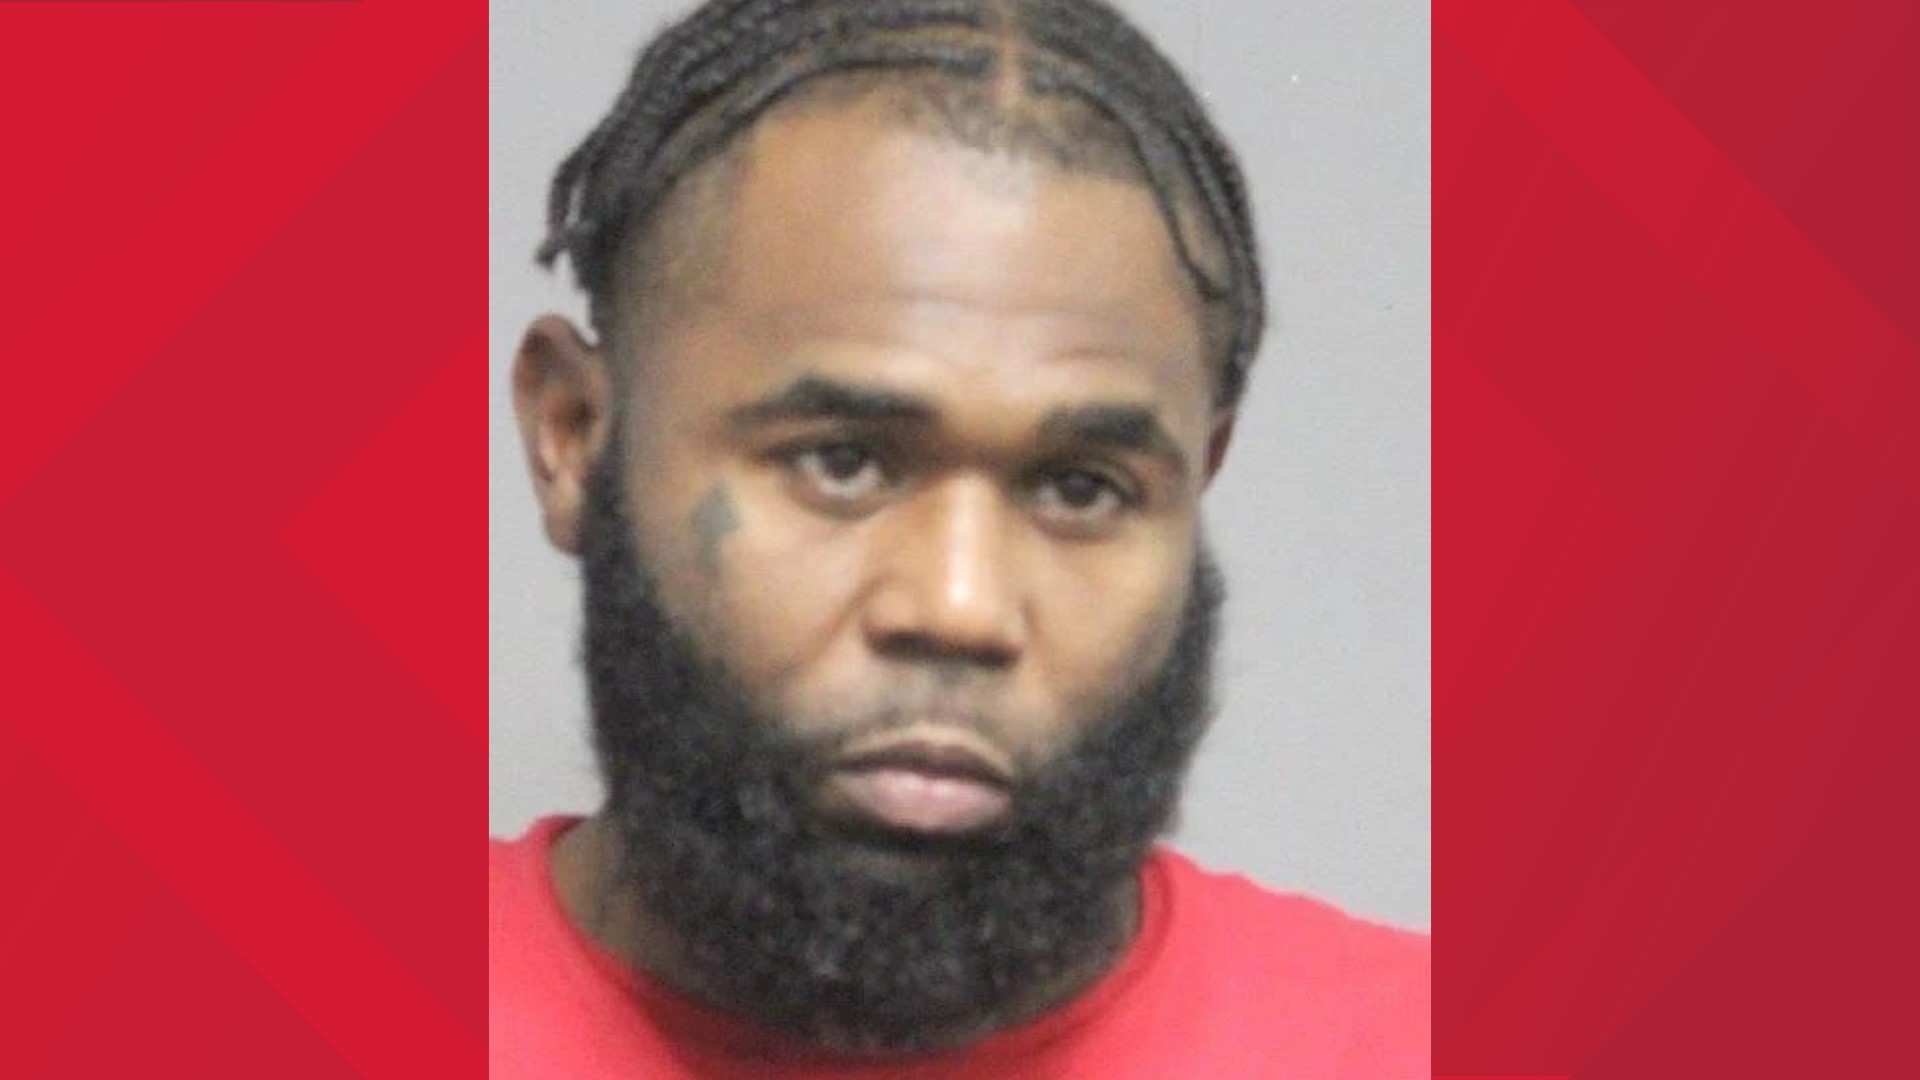 Prosecutors say 38-year-old Raymond Lee shot Alonzo Wiley in an armed robbery at a motel in the 2200 block of the Westbank expressway, where they were both residents